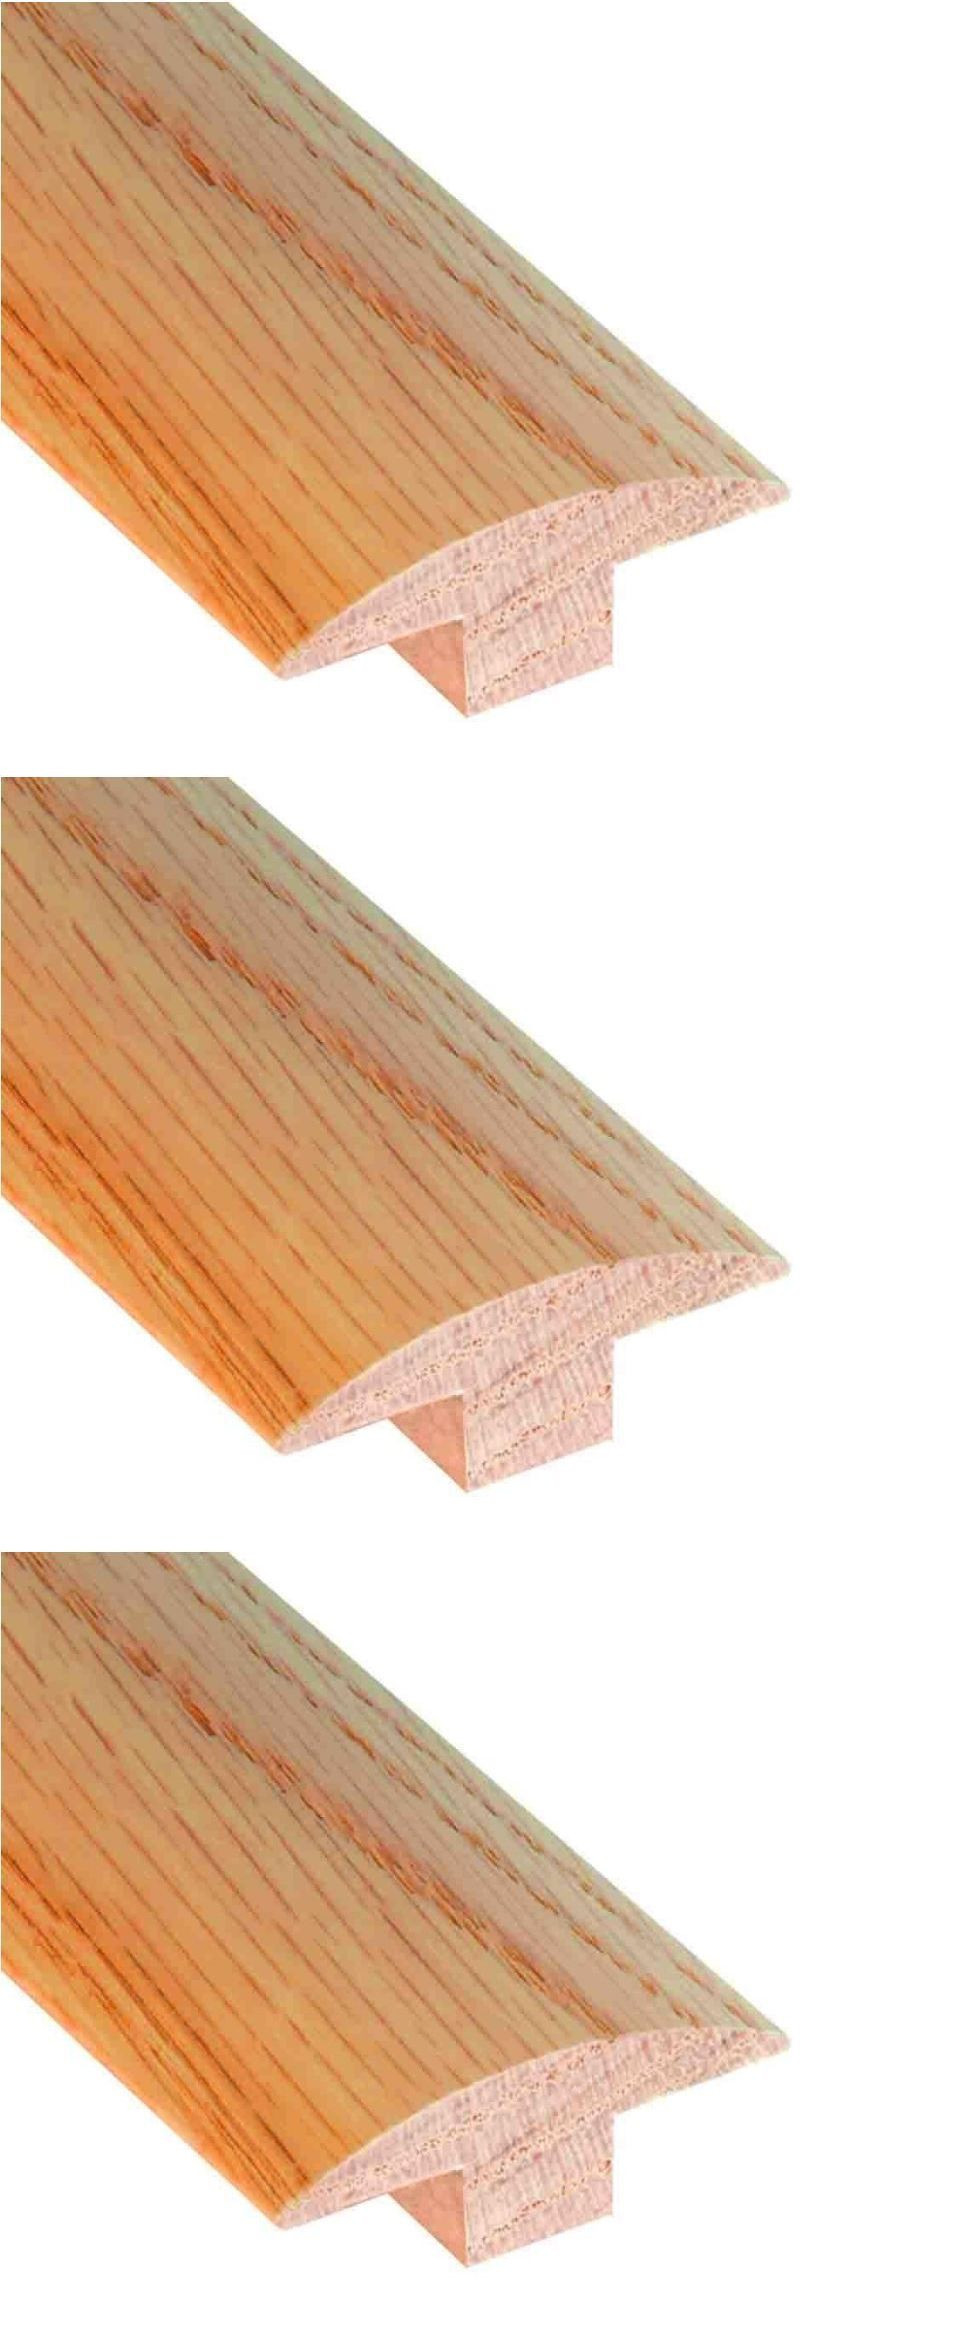 27 Nice 3 1 4 Unfinished Hardwood Flooring 2023 free download 3 1 4 unfinished hardwood flooring of flooring moldings and trims 129788 unfinished oak 647 x 2 x 78 in with regard to flooring moldings and trims 129788 unfinished oak 647 x 2 x 78 in